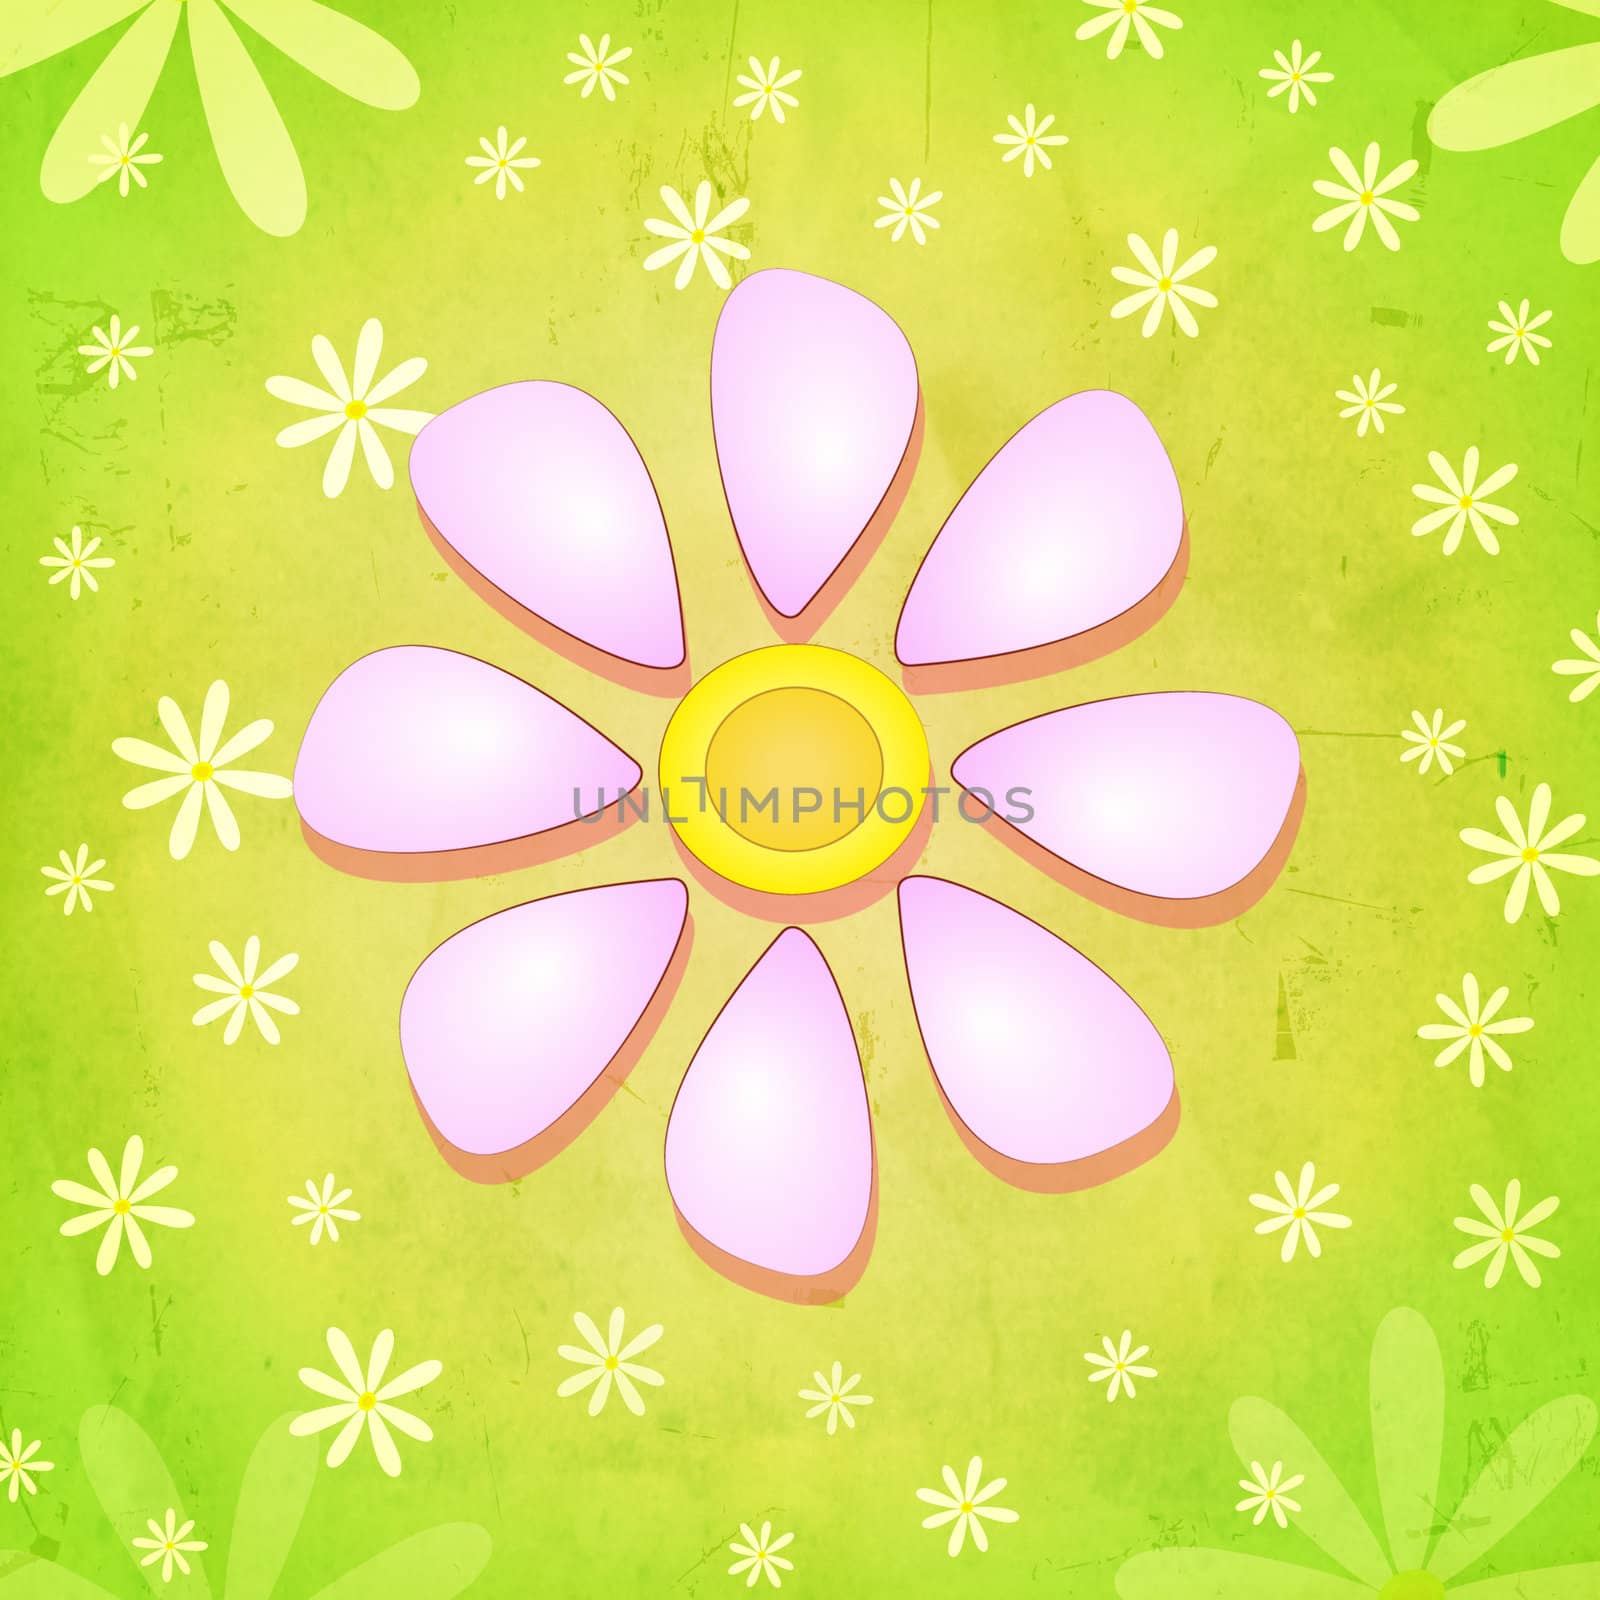 spring background with pink flower over green gradient with white daisy flowers